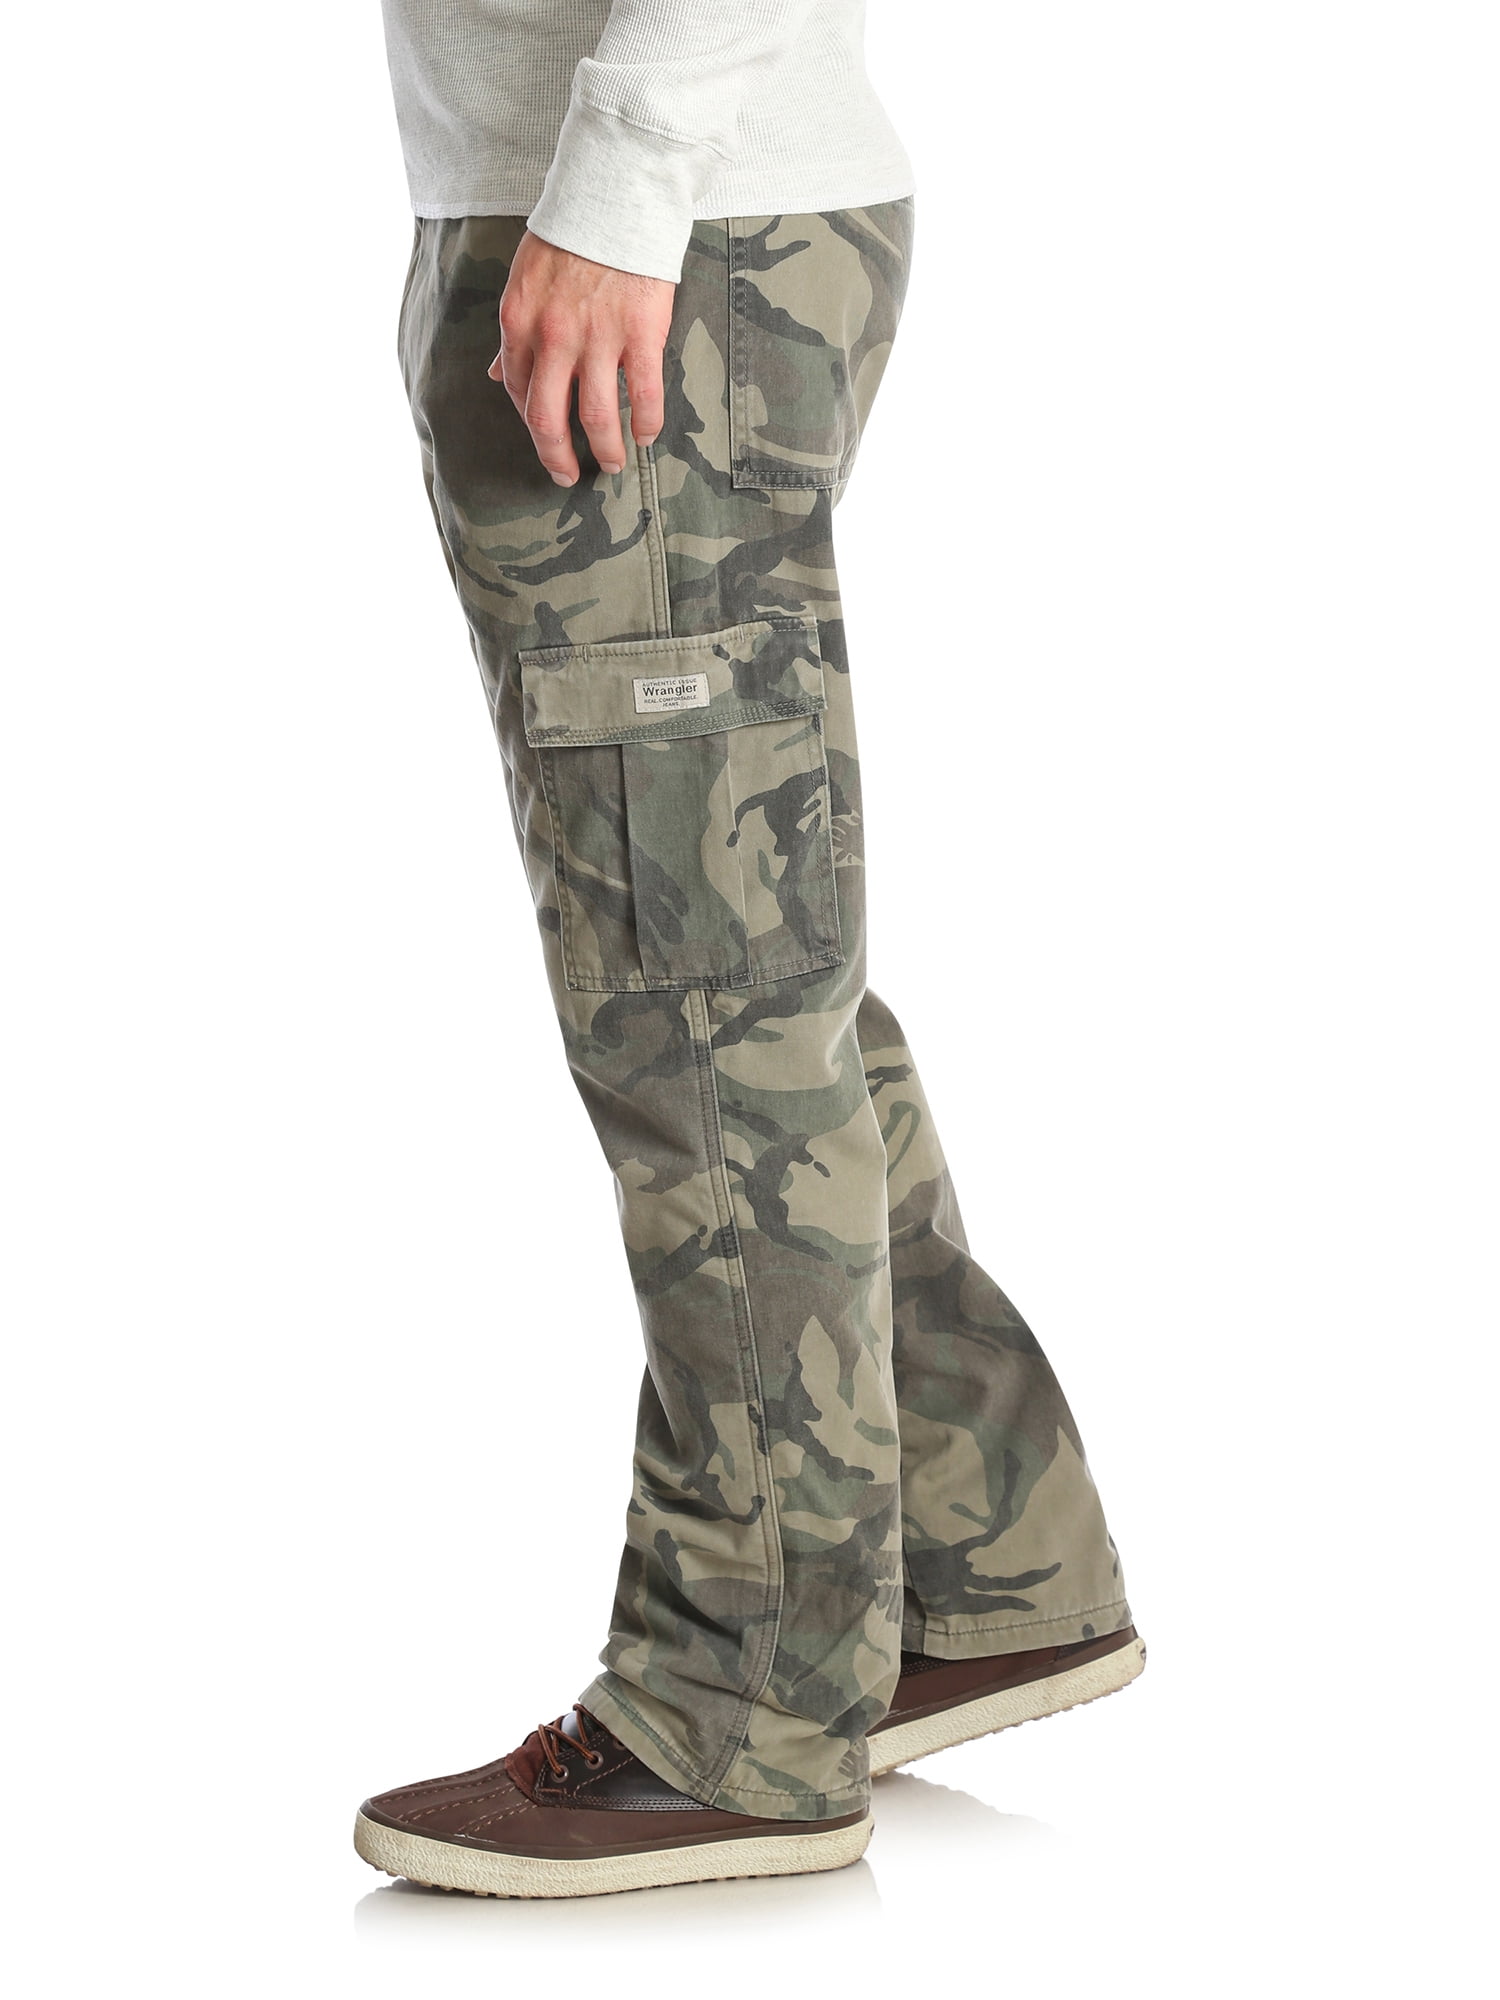 Wrangler Insulated Camo Jeans Online, SAVE 41% 